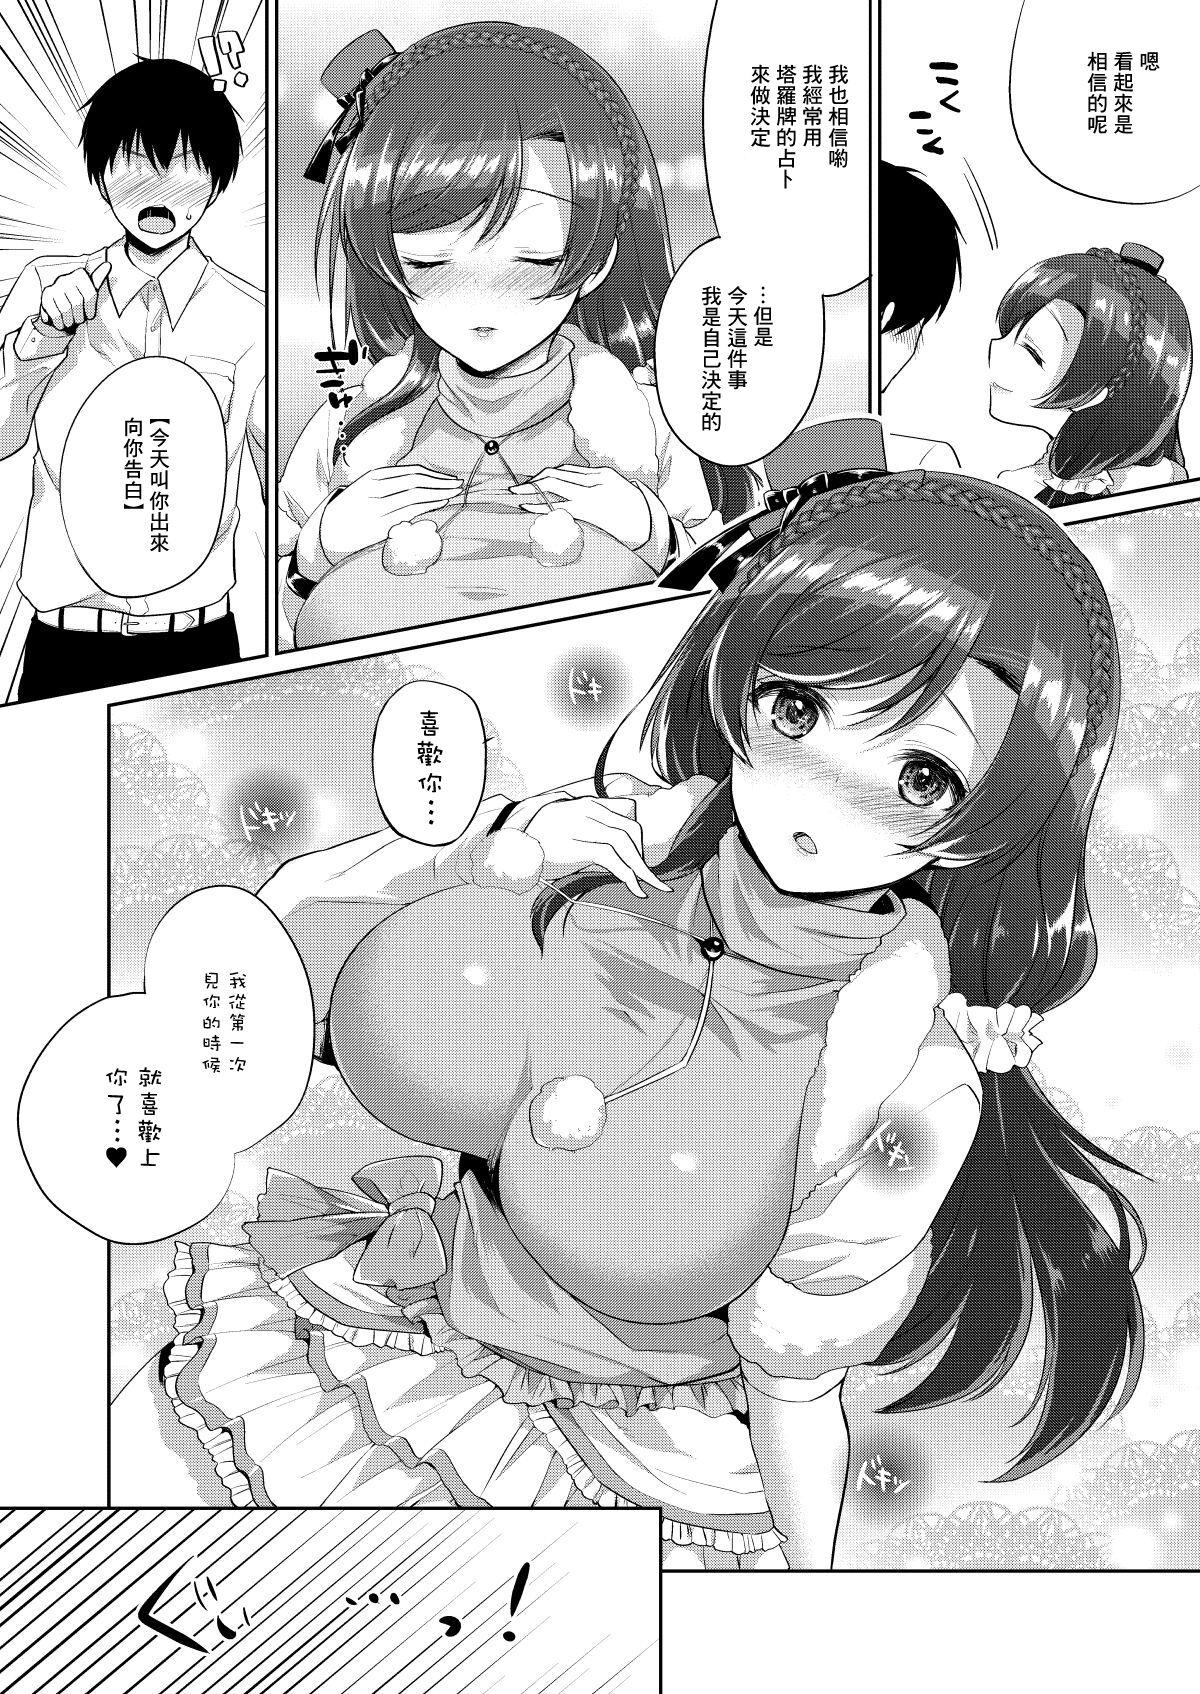 Tits 希といちゃラブエッチ - Love live Gay Clinic - Page 2